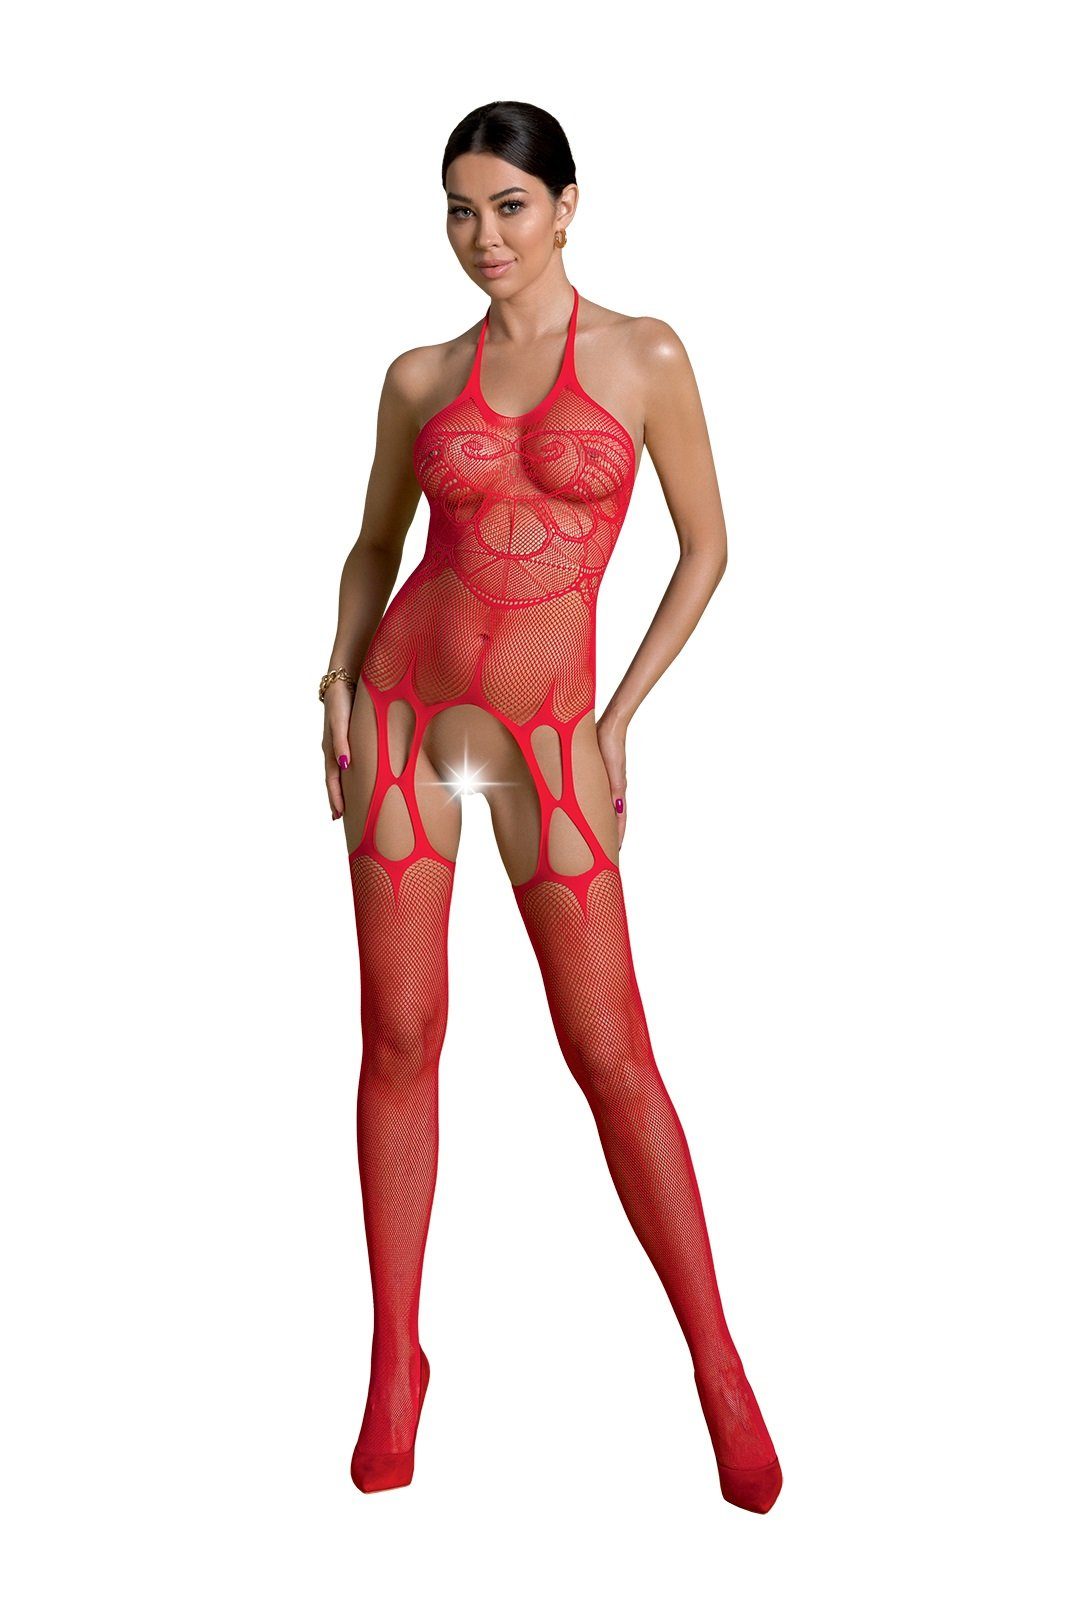 Bodystocking transparent 20 ouvert Collection Passion rot St) Bodystocking Passion Netz (1 DEN Catsuit Eco